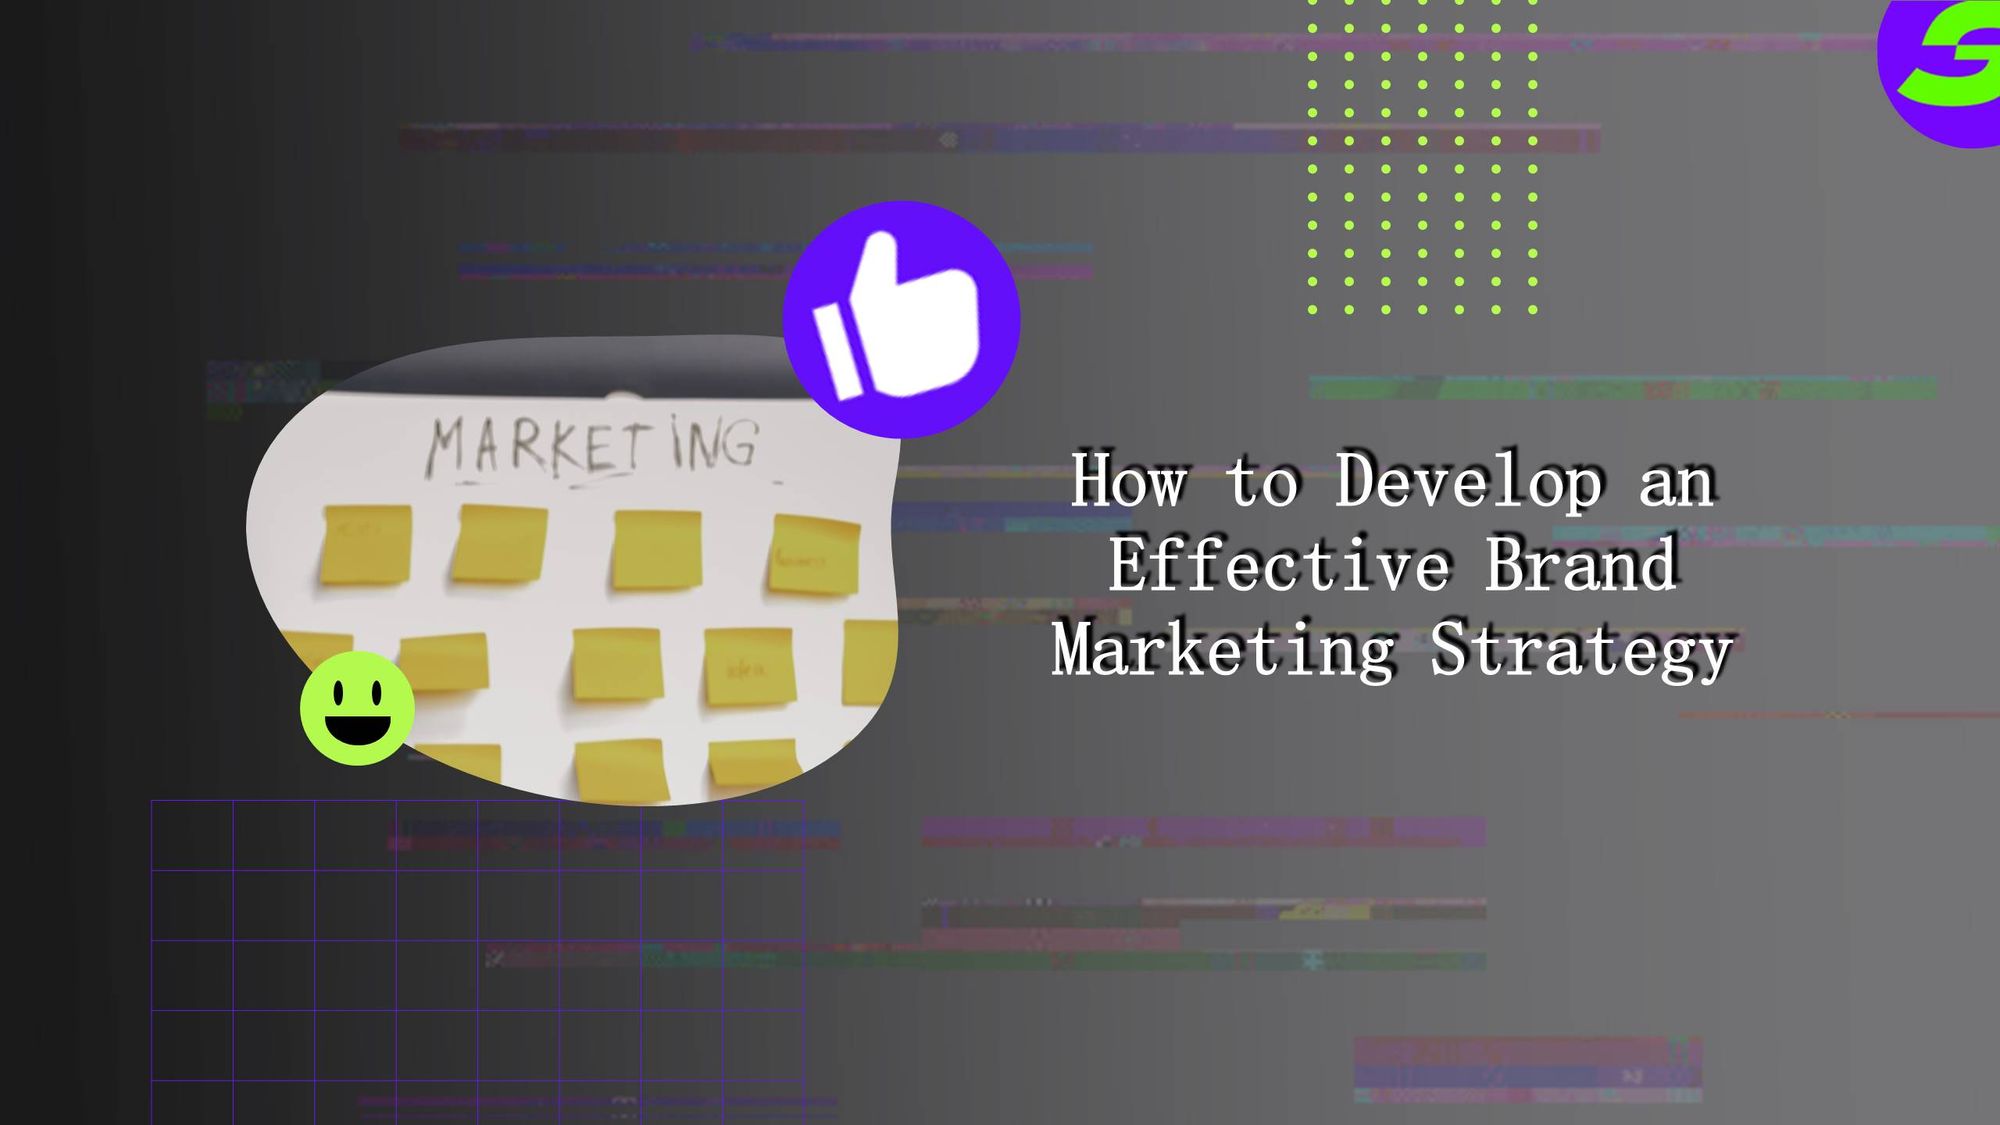 Tips for Developing an Effective Brand Marketing Strategy